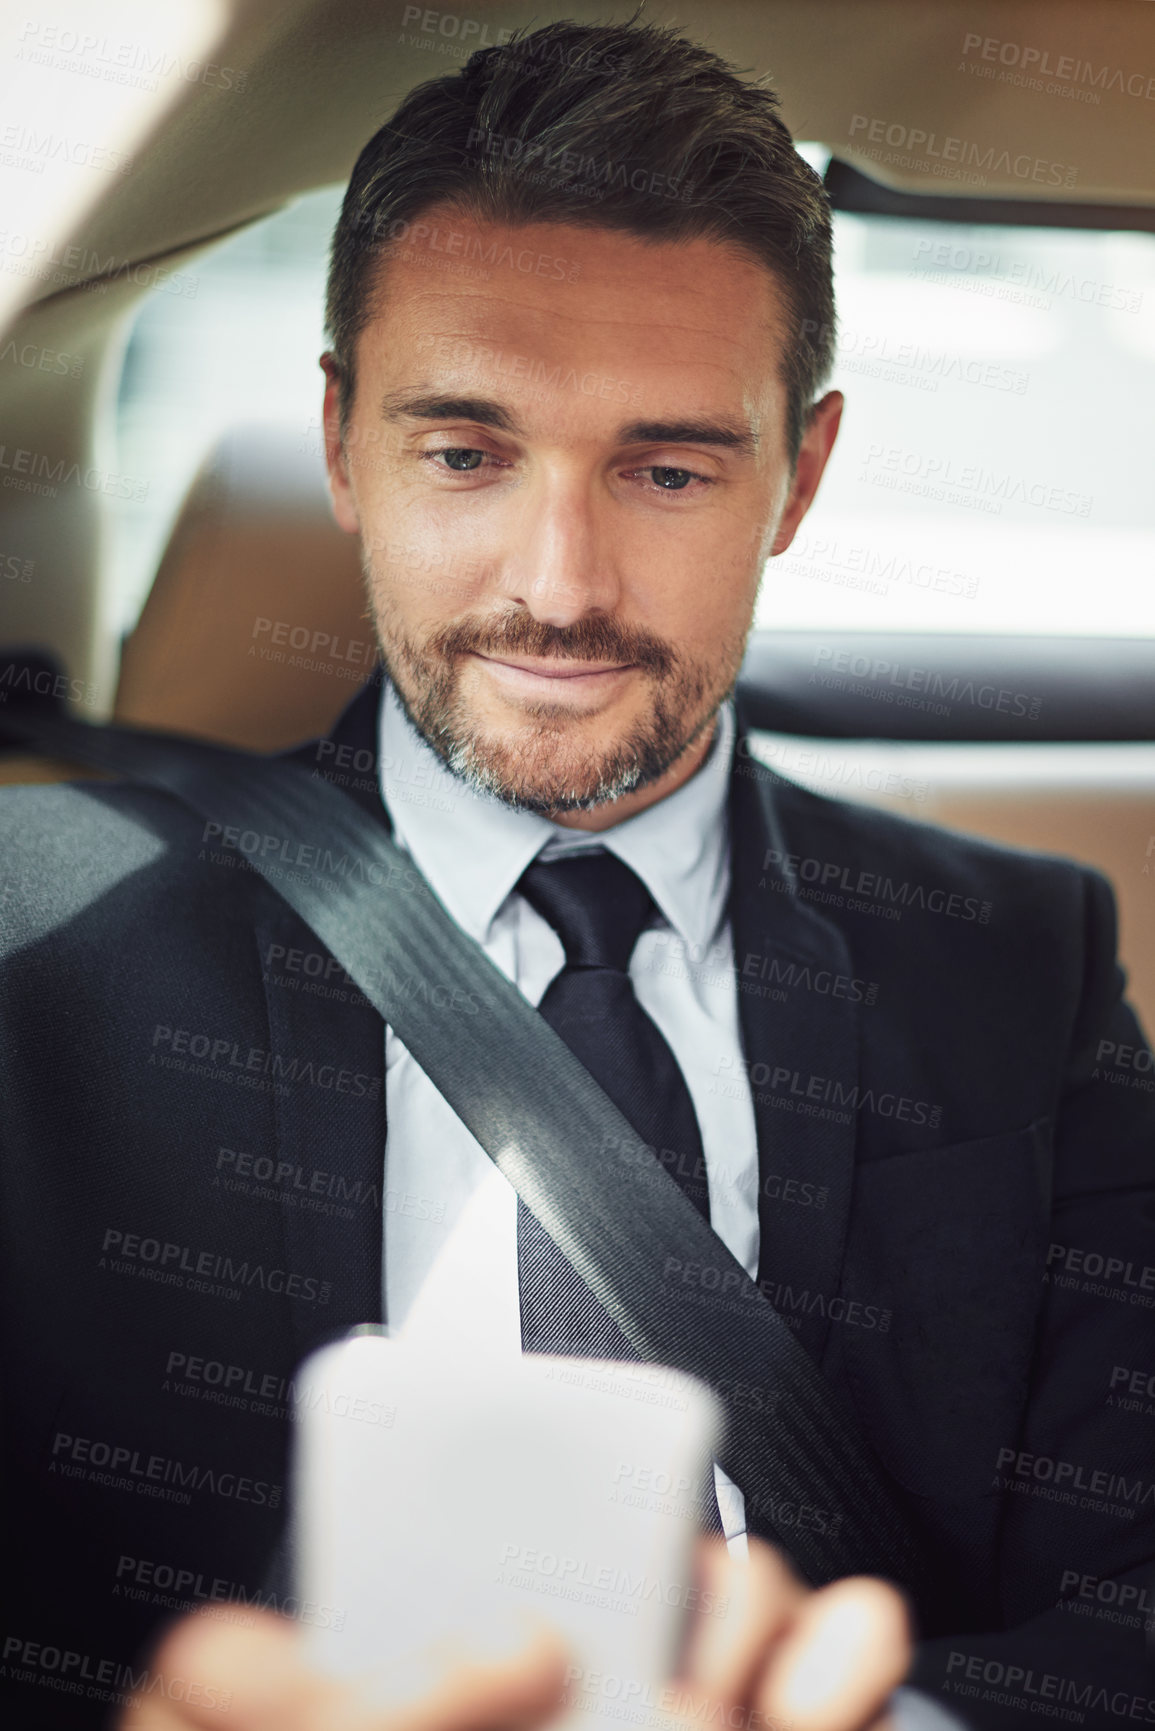 Buy stock photo Shot of a businessman using his phone while traveling in a car